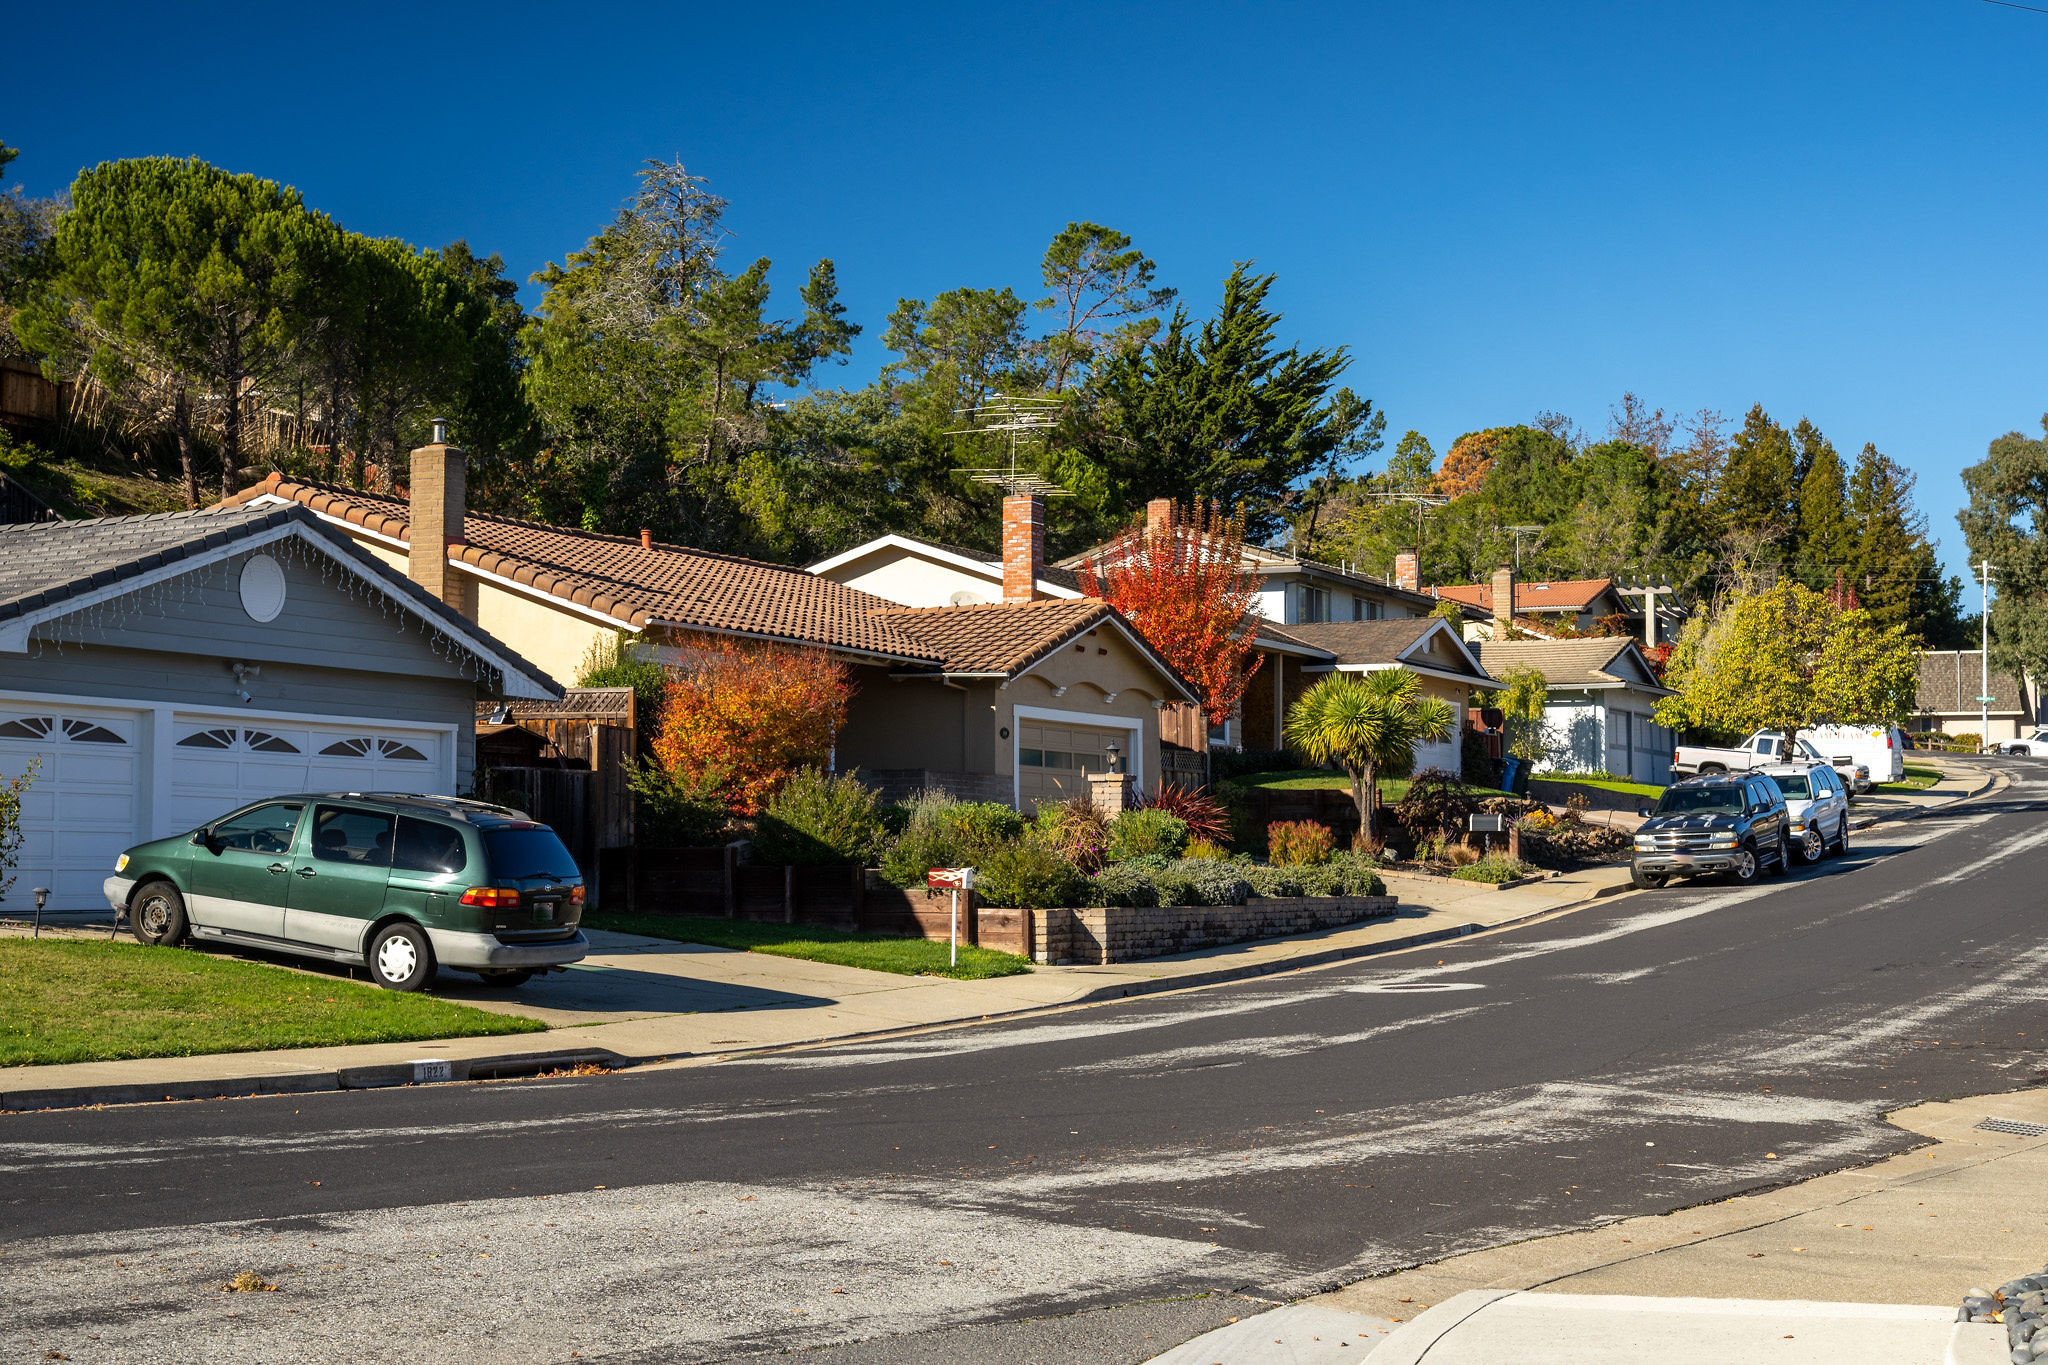 Multiple craftsman homes and street view in the San Mateo Woods/Bayridge area in San Mateo